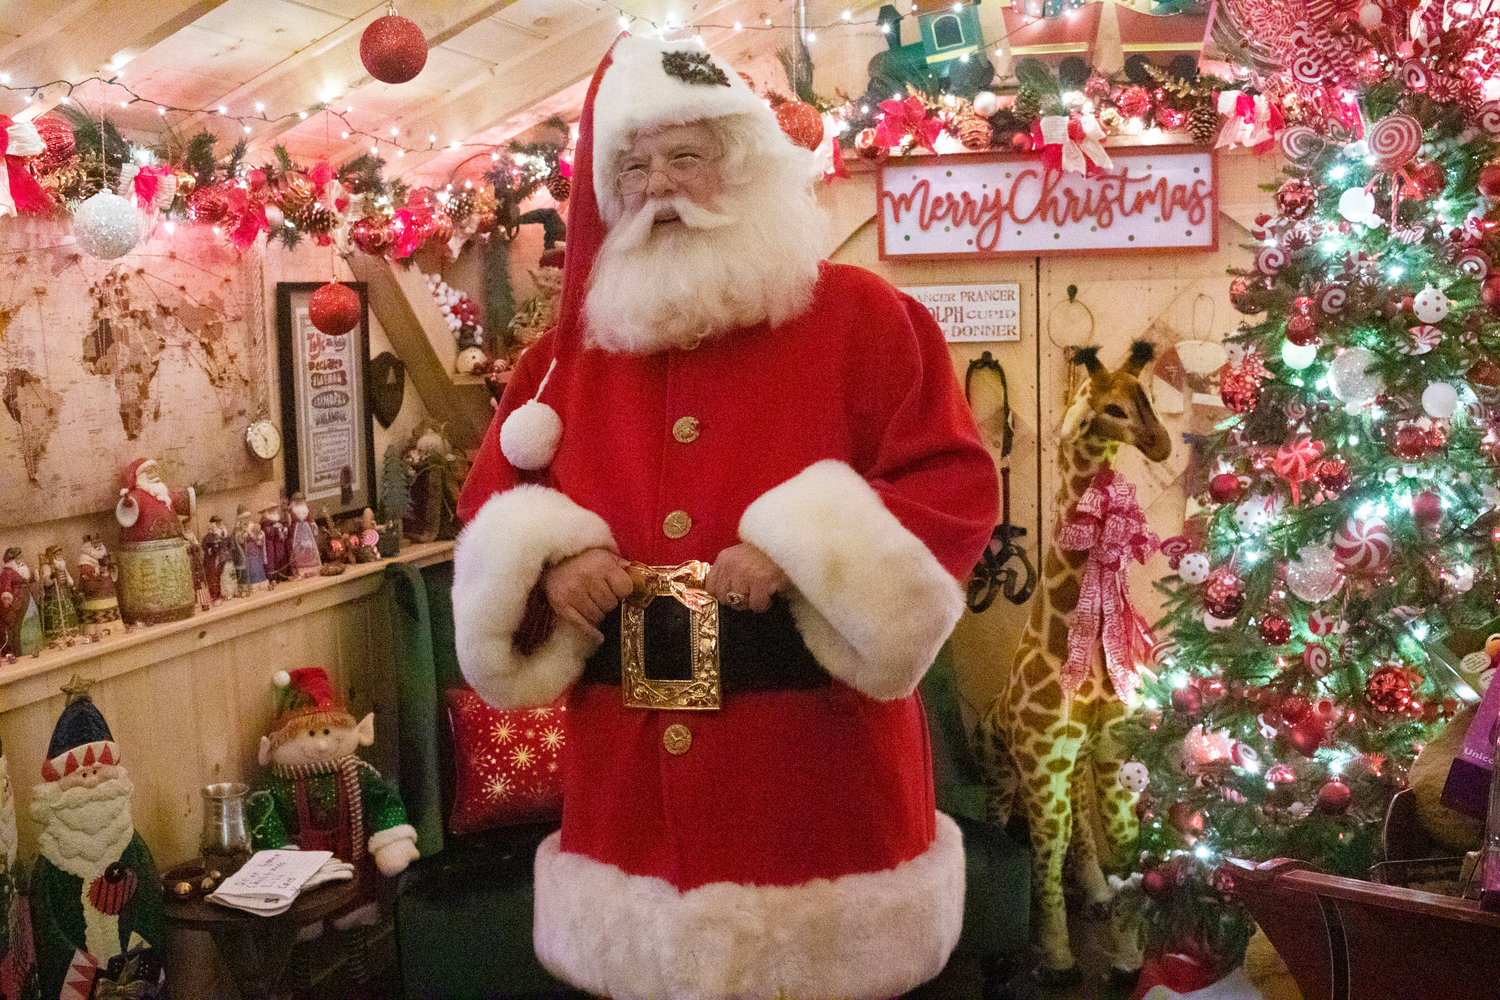 Santa Claus prepares to welcome guests to his house during last year’s inaugural opening. The house has a new location this year on the Town Common.